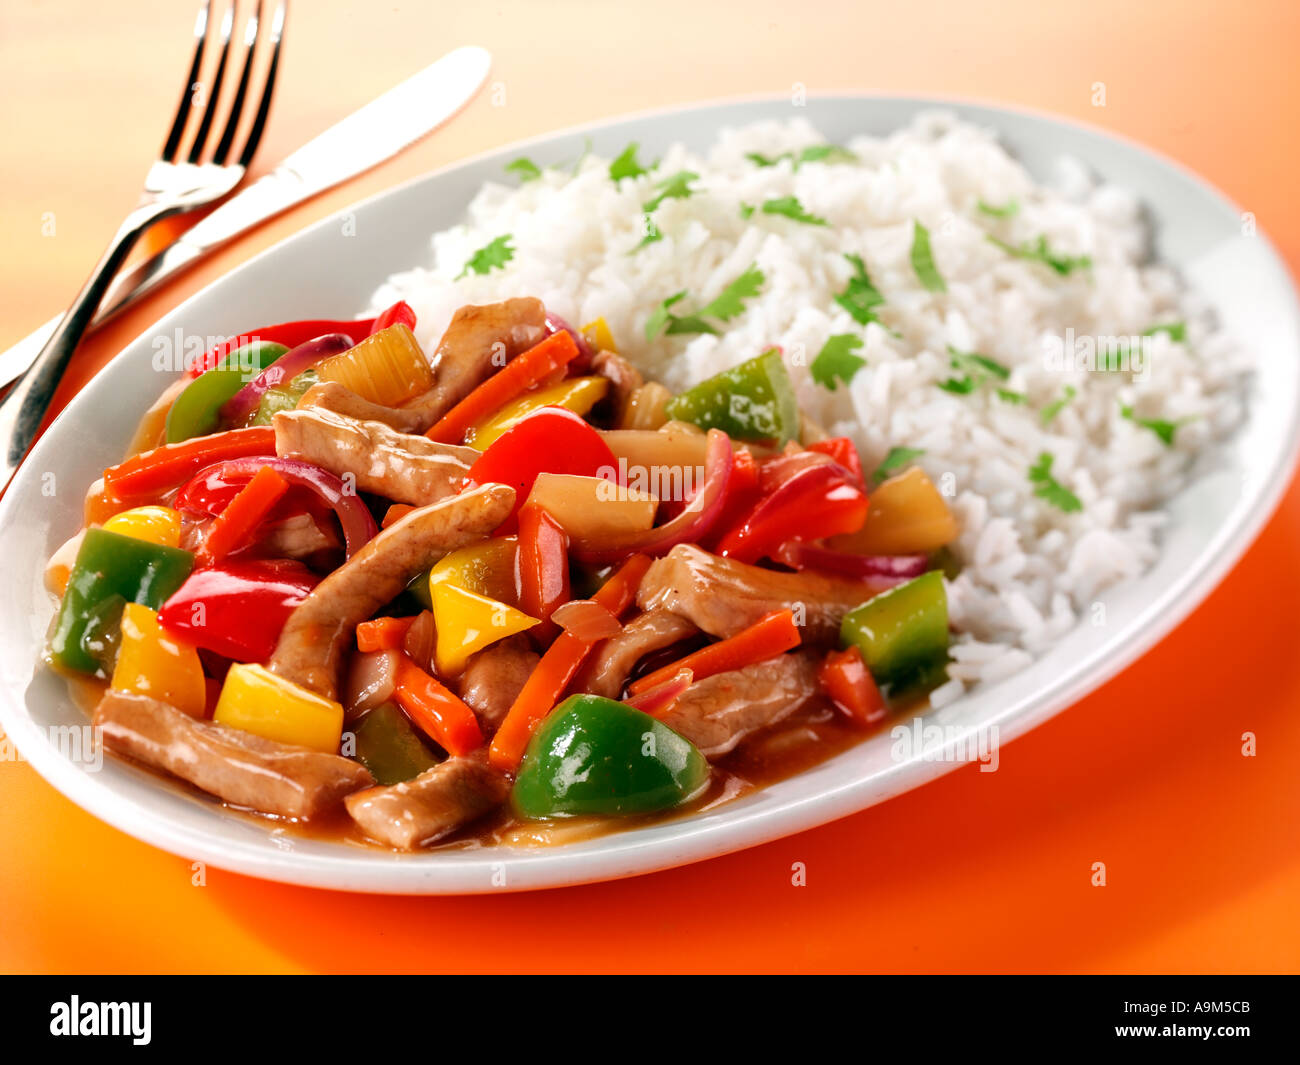 SWEET AND SOUR PORK WITH RICE Stock Photo